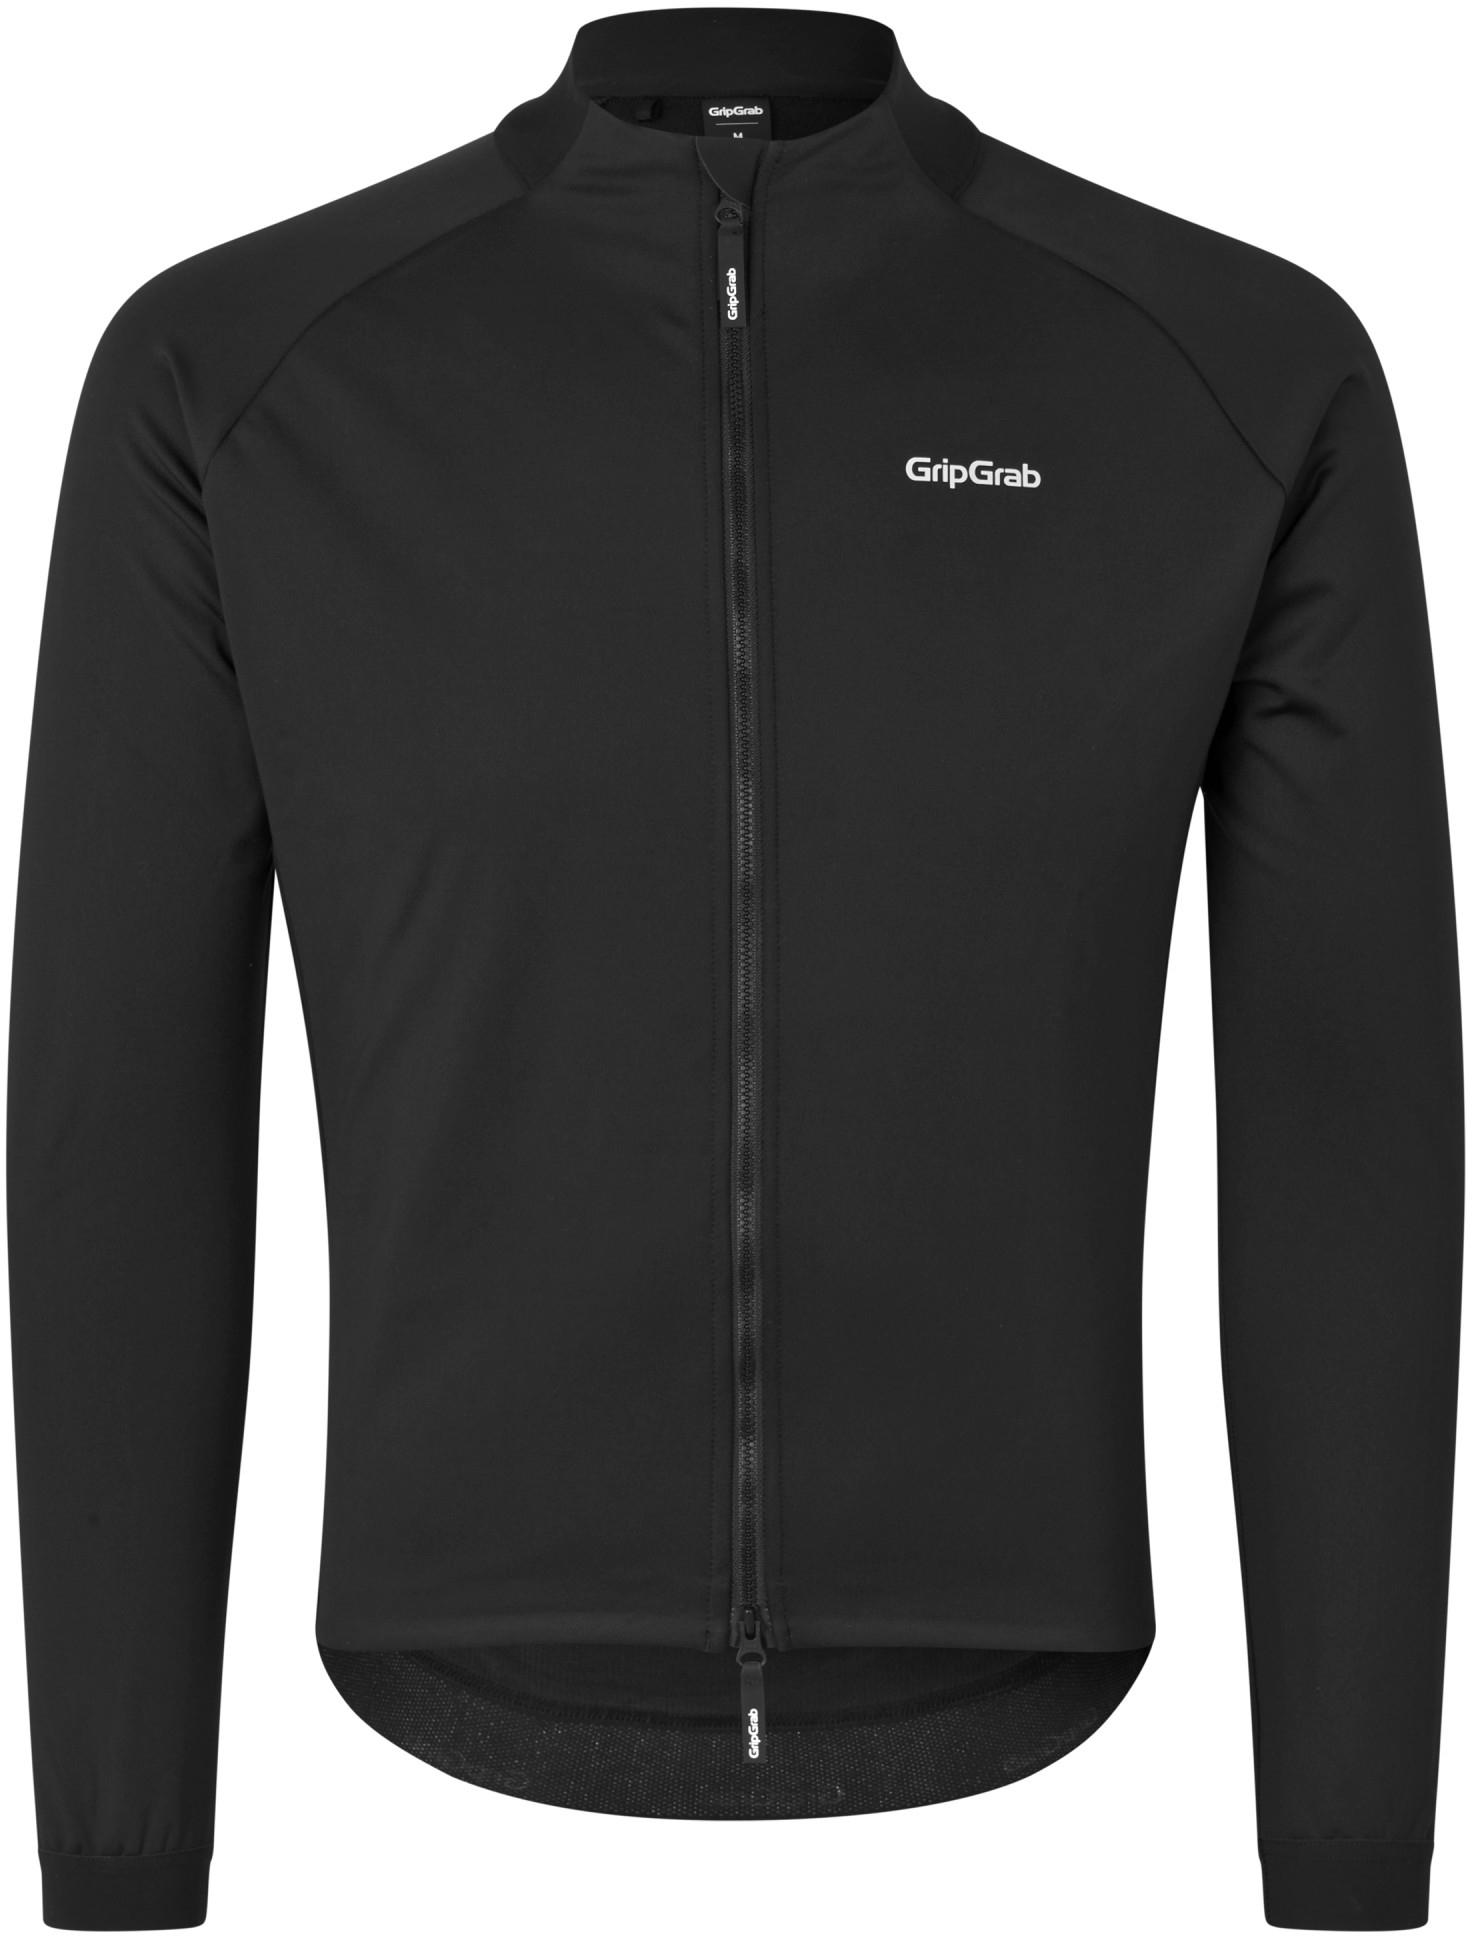 Gripgrab Thermashell Windproof Winter Jacket  Black